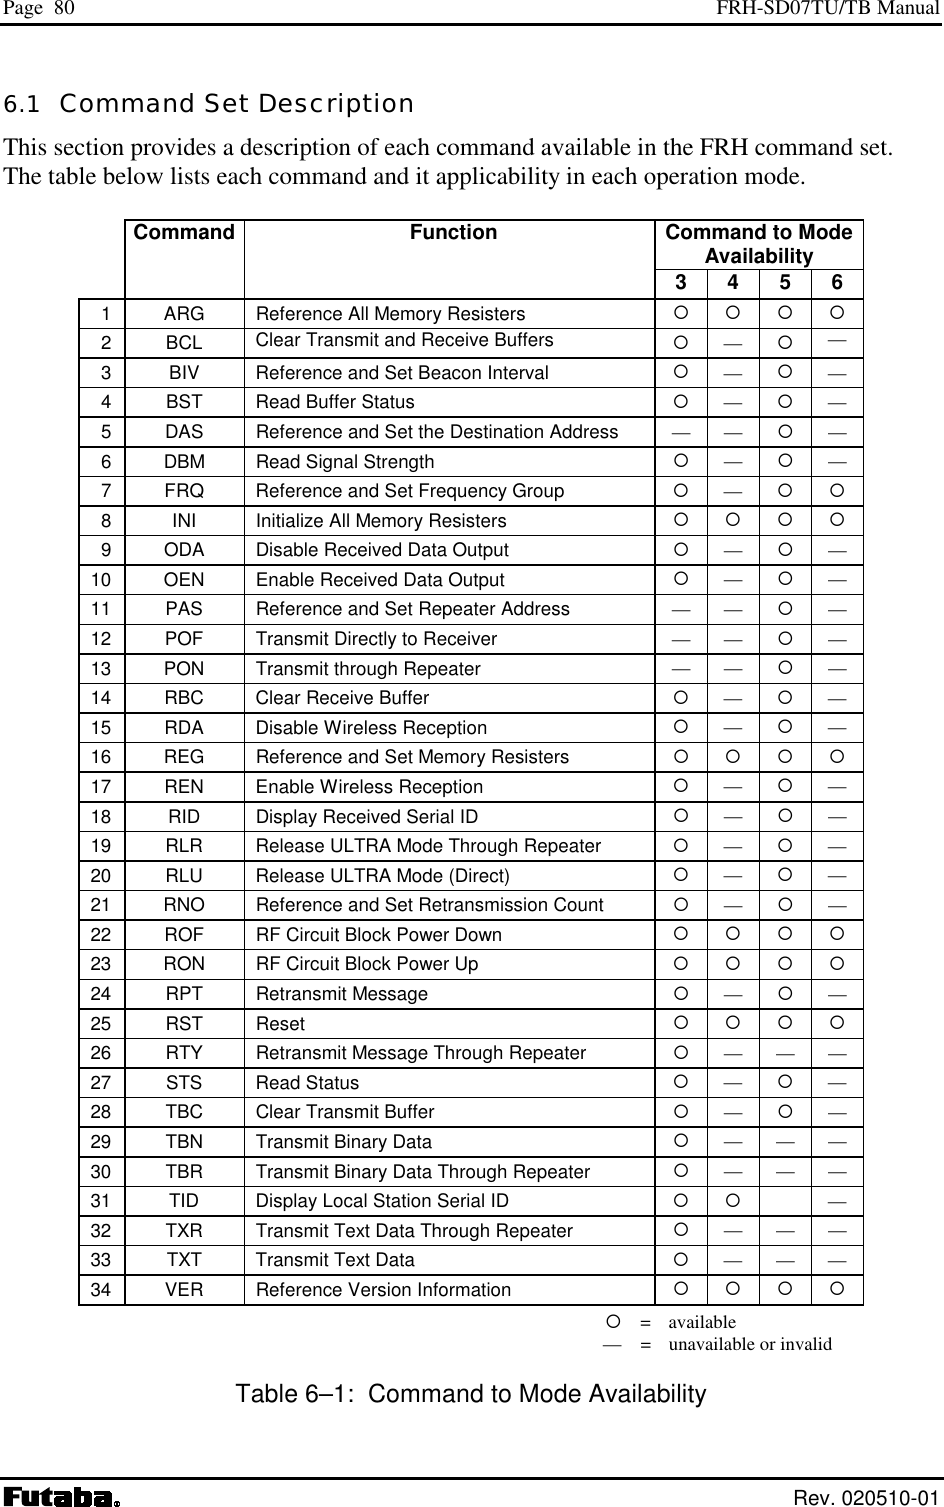 Page  80  FRH-SD07TU/TB Manual  Rev. 020510-01 6.1  Command Set Description This section provides a description of each command available in the FRH command set. The table below lists each command and it applicability in each operation mode.    Command    Function  Command to Mode Availability         3 4 5 6 1   ARG  Reference All Memory Resisters         2   BCL  Clear Transmit and Receive Buffers    —  — 3   BIV  Reference and Set Beacon Interval    —  — 4   BST  Read Buffer Status    —  — 5   DAS  Reference and Set the Destination Address  — —   — 6   DBM  Read Signal Strength    —  — 7   FRQ  Reference and Set Frequency Group    —   8   INI  Initialize All Memory Resisters         9   ODA  Disable Received Data Output    —  — 10   OEN  Enable Received Data Output    —  — 11   PAS   Reference and Set Repeater Address  — —   — 12   POF   Transmit Directly to Receiver  — —   — 13   PON   Transmit through Repeater  — —   — 14   RBC  Clear Receive Buffer    —  — 15   RDA  Disable Wireless Reception    —  — 16   REG  Reference and Set Memory Resisters         17   REN  Enable Wireless Reception    —  — 18   RID  Display Received Serial ID    —  — 19    RLR   Release ULTRA Mode Through Repeater   —  — 20    RLU   Release ULTRA Mode (Direct)   —  — 21   RNO  Reference and Set Retransmission Count    —  — 22    ROF   RF Circuit Block Power Down      23    RON   RF Circuit Block Power Up      24   RPT  Retransmit Message    —  — 25   RST  Reset         26   RTY  Retransmit Message Through Repeater    — — — 27   STS  Read Status    —  — 28   TBC  Clear Transmit Buffer    —  — 29   TBN  Transmit Binary Data    — — — 30   TBR  Transmit Binary Data Through Repeater    — — — 31    TID   Display Local Station Serial ID     — 32   TXR  Transmit Text Data Through Repeater    — — — 33   TXT  Transmit Text Data    — — — 34   VER  Reference Version Information           = available    —    =  unavailable or invalid Table 6–1:  Command to Mode Availability 